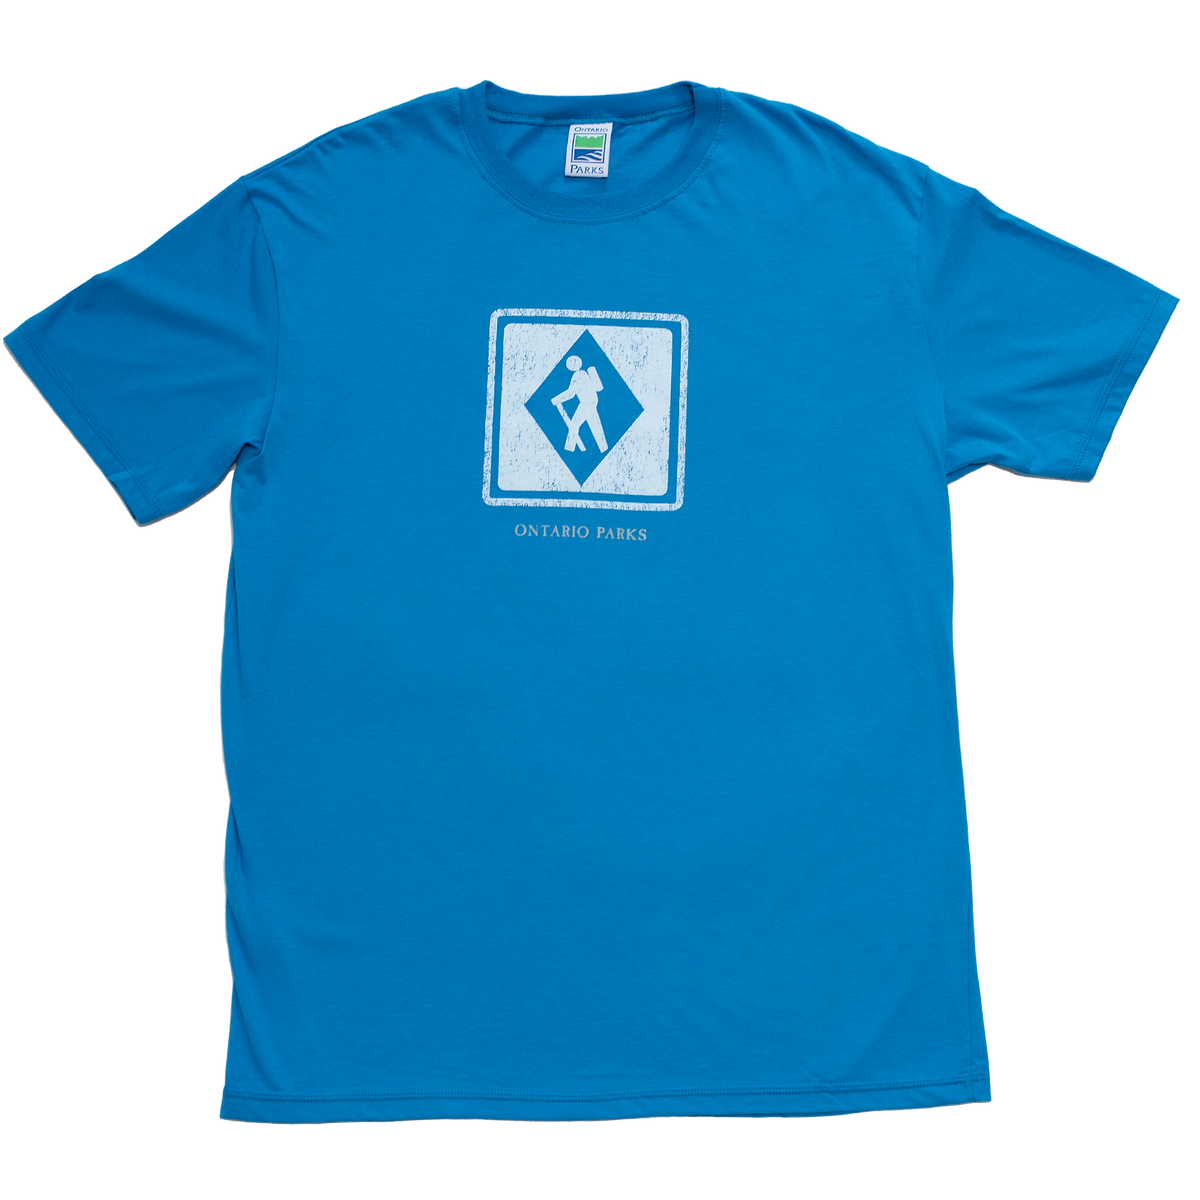 Blue t-shirt with the hiker symbol on the chest and "Ontario Parks" below. 